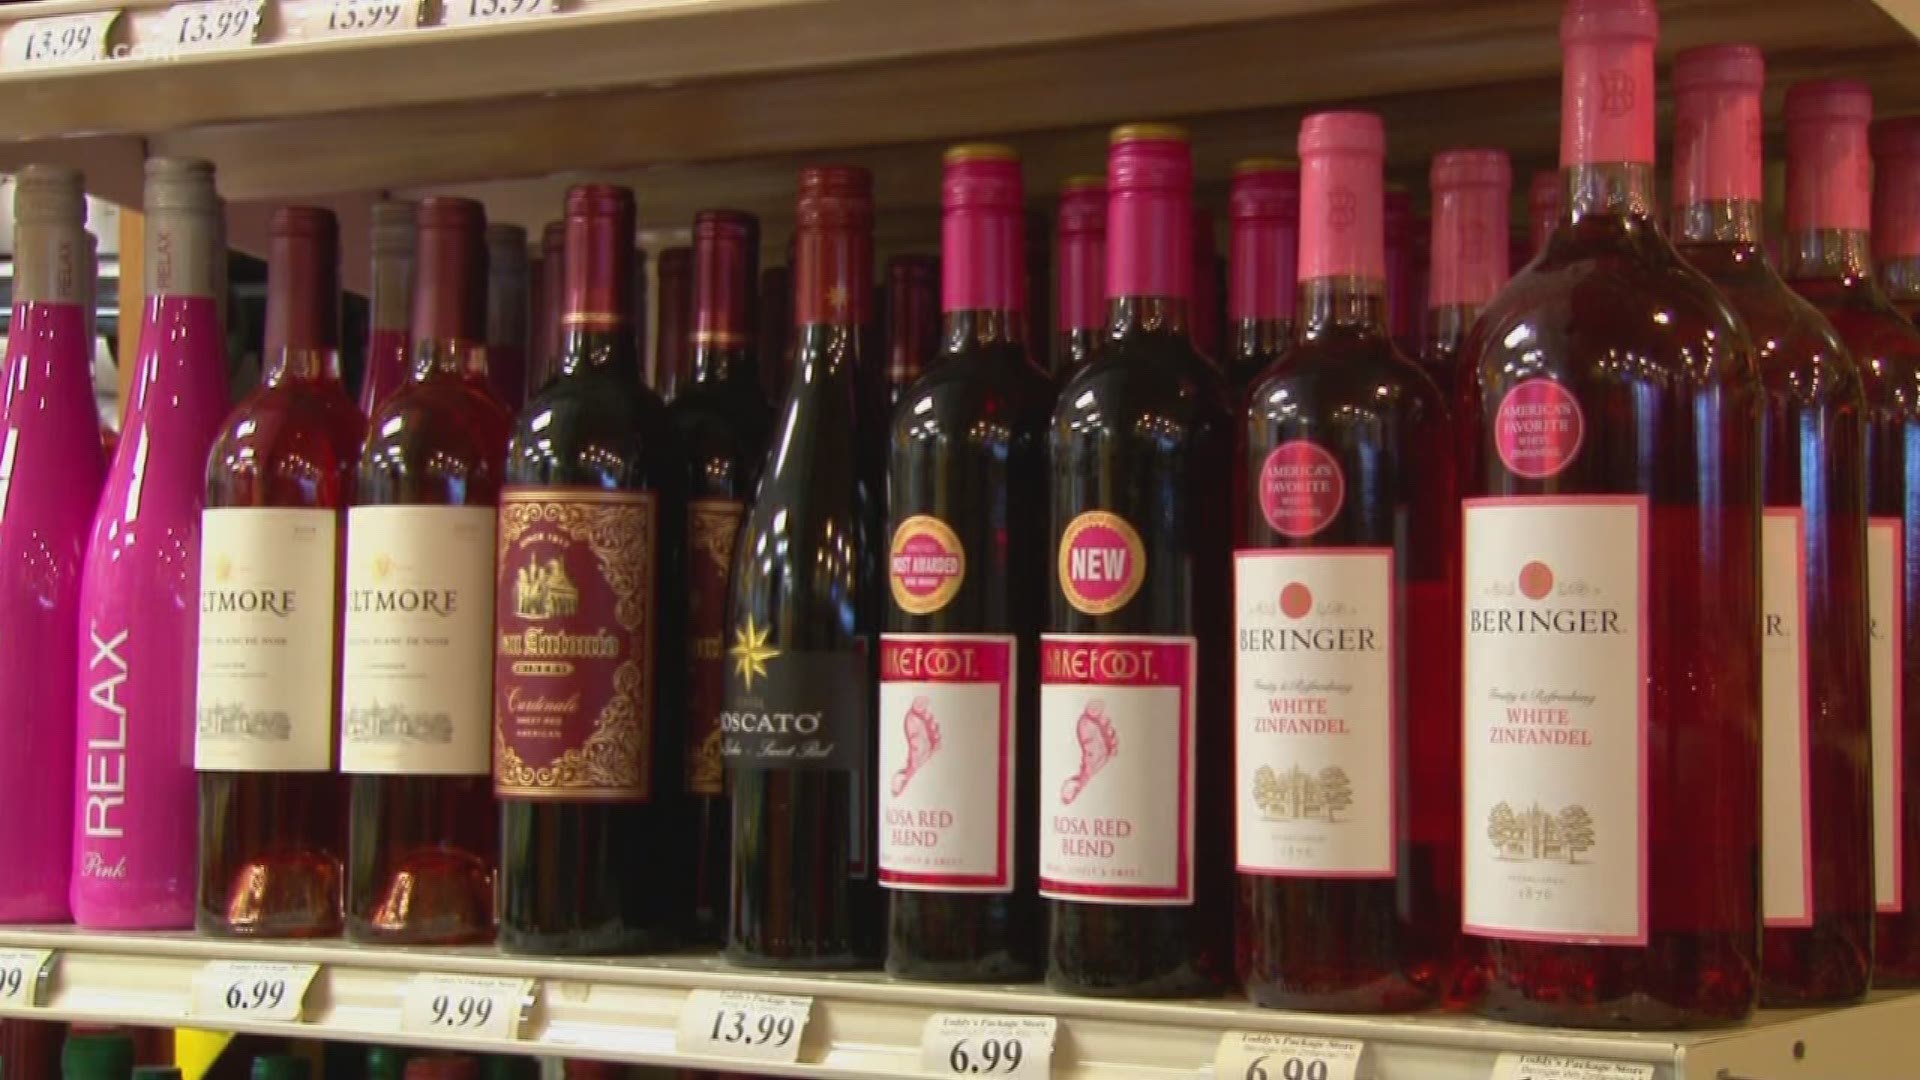 Governor Haslam signed a bill that would allow liquor stores to open on Sundays to sell wine and liquor.